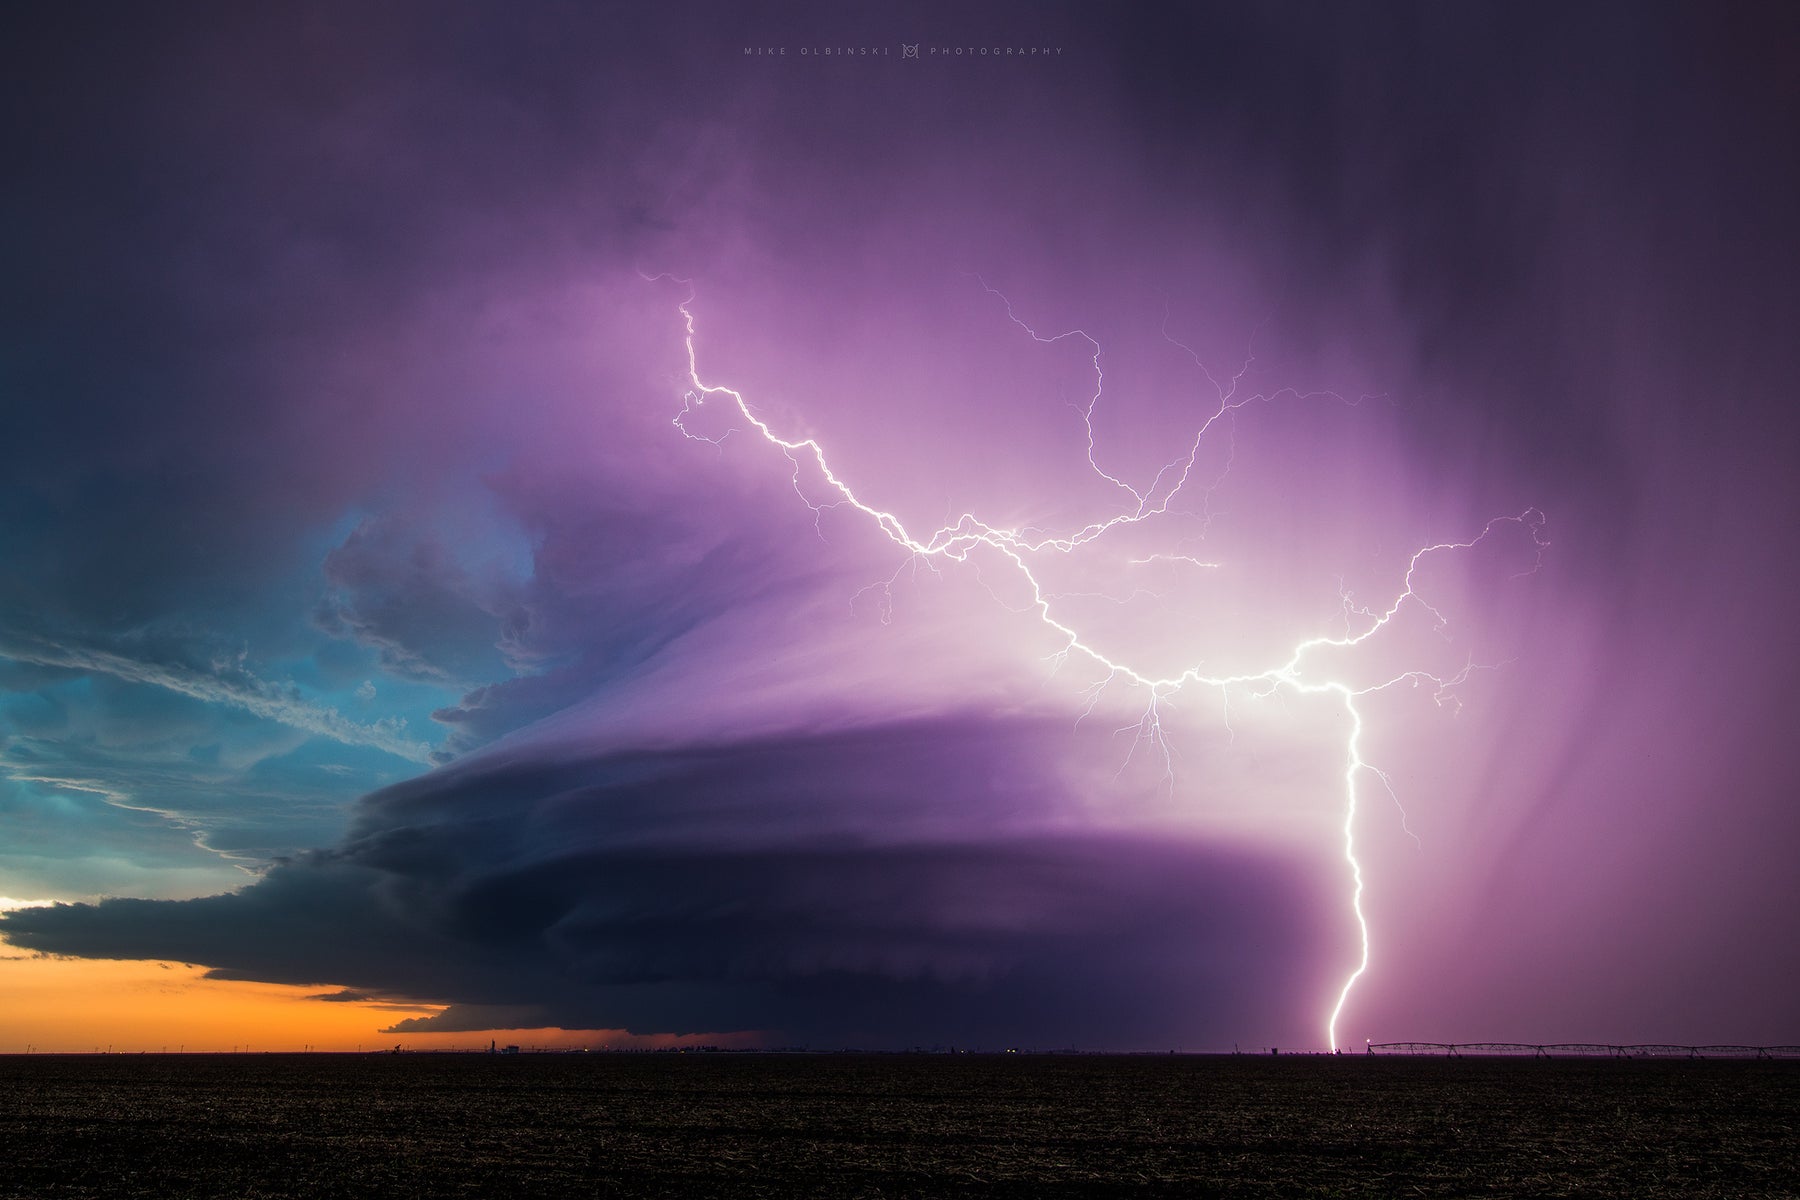 Davis Sponsors Storm Photo of the Year Contest